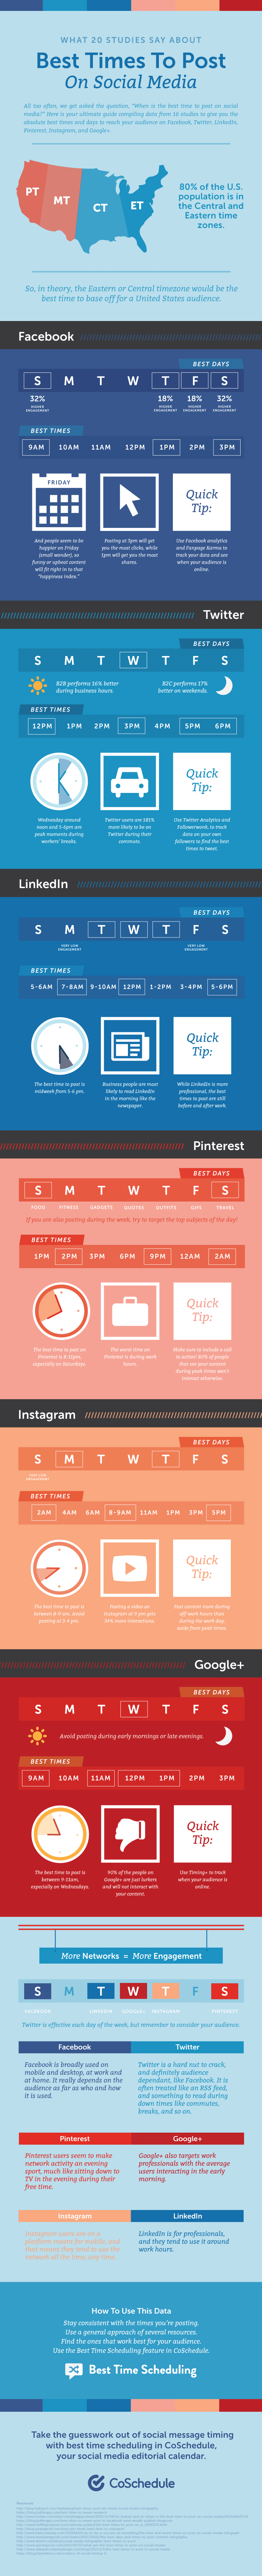 best time to post on social media infographic